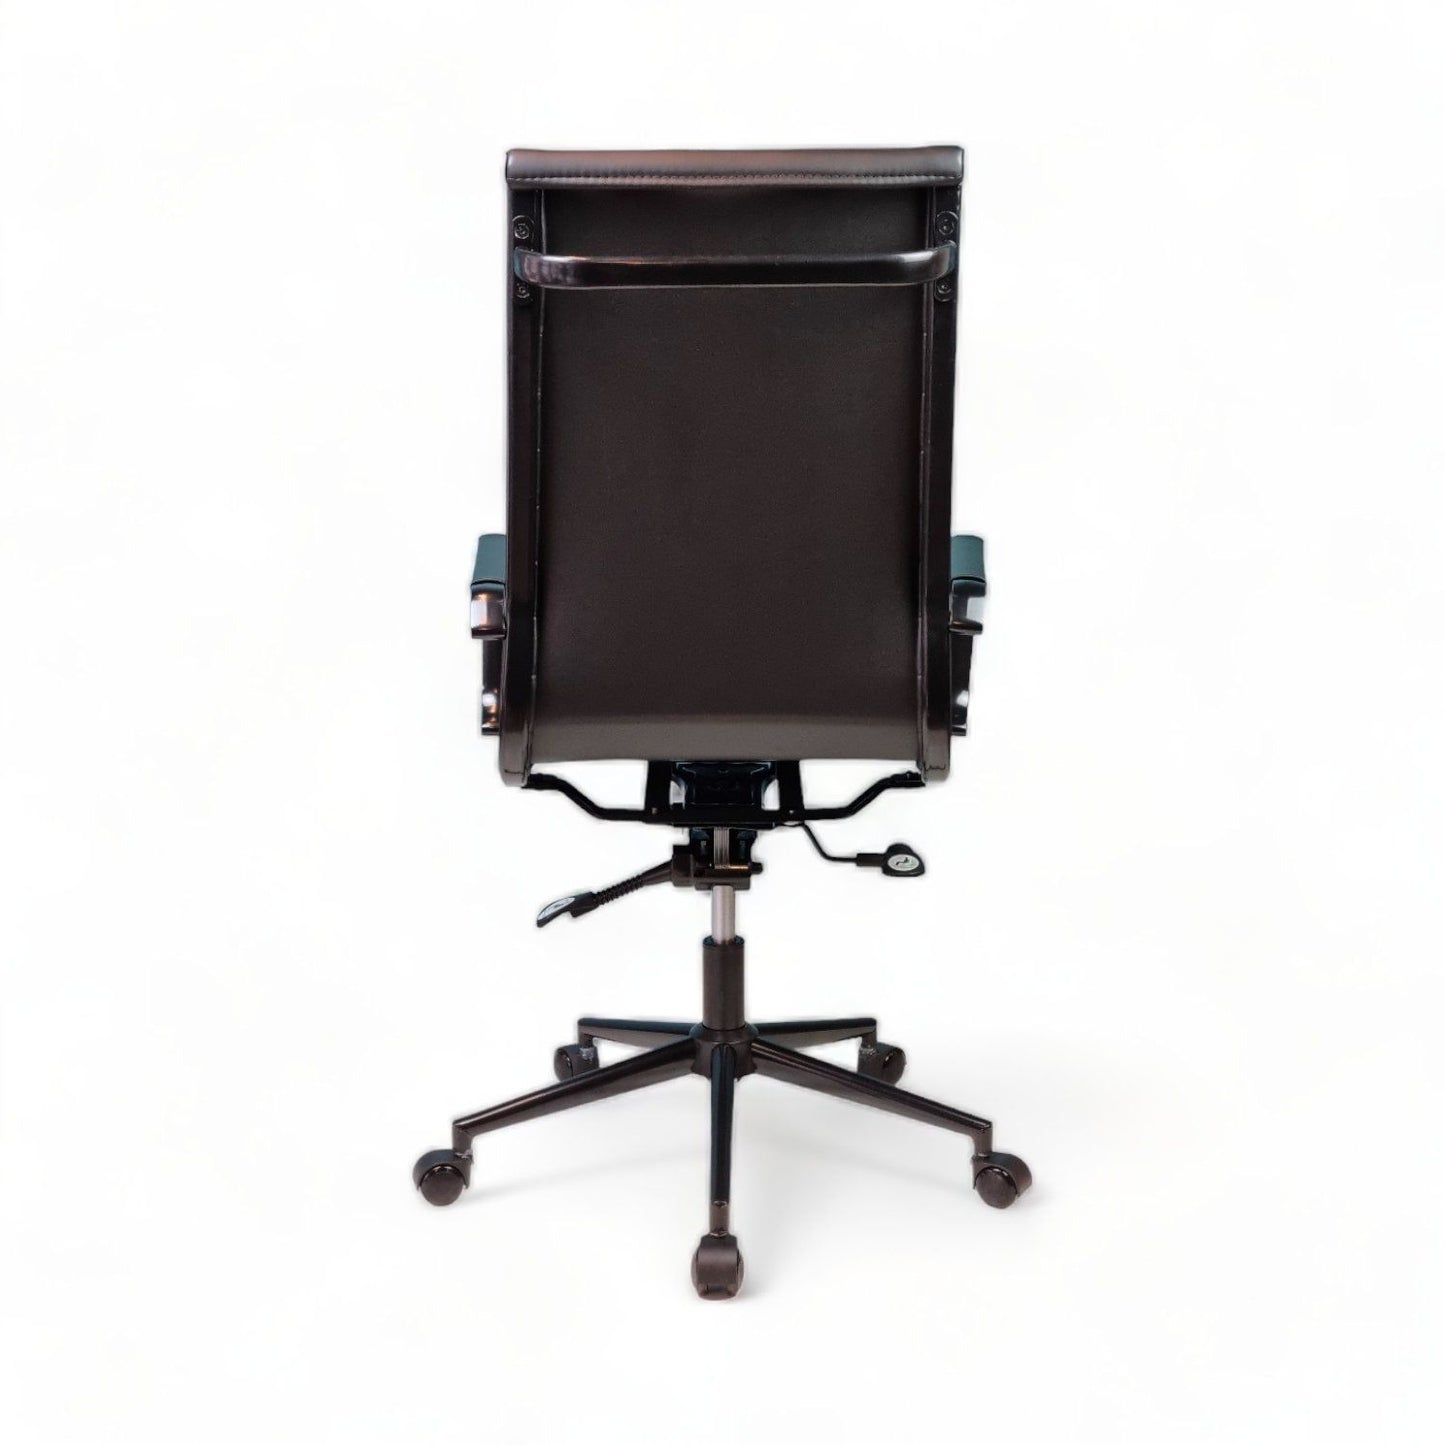 Bety Manager - Black - Office Chair